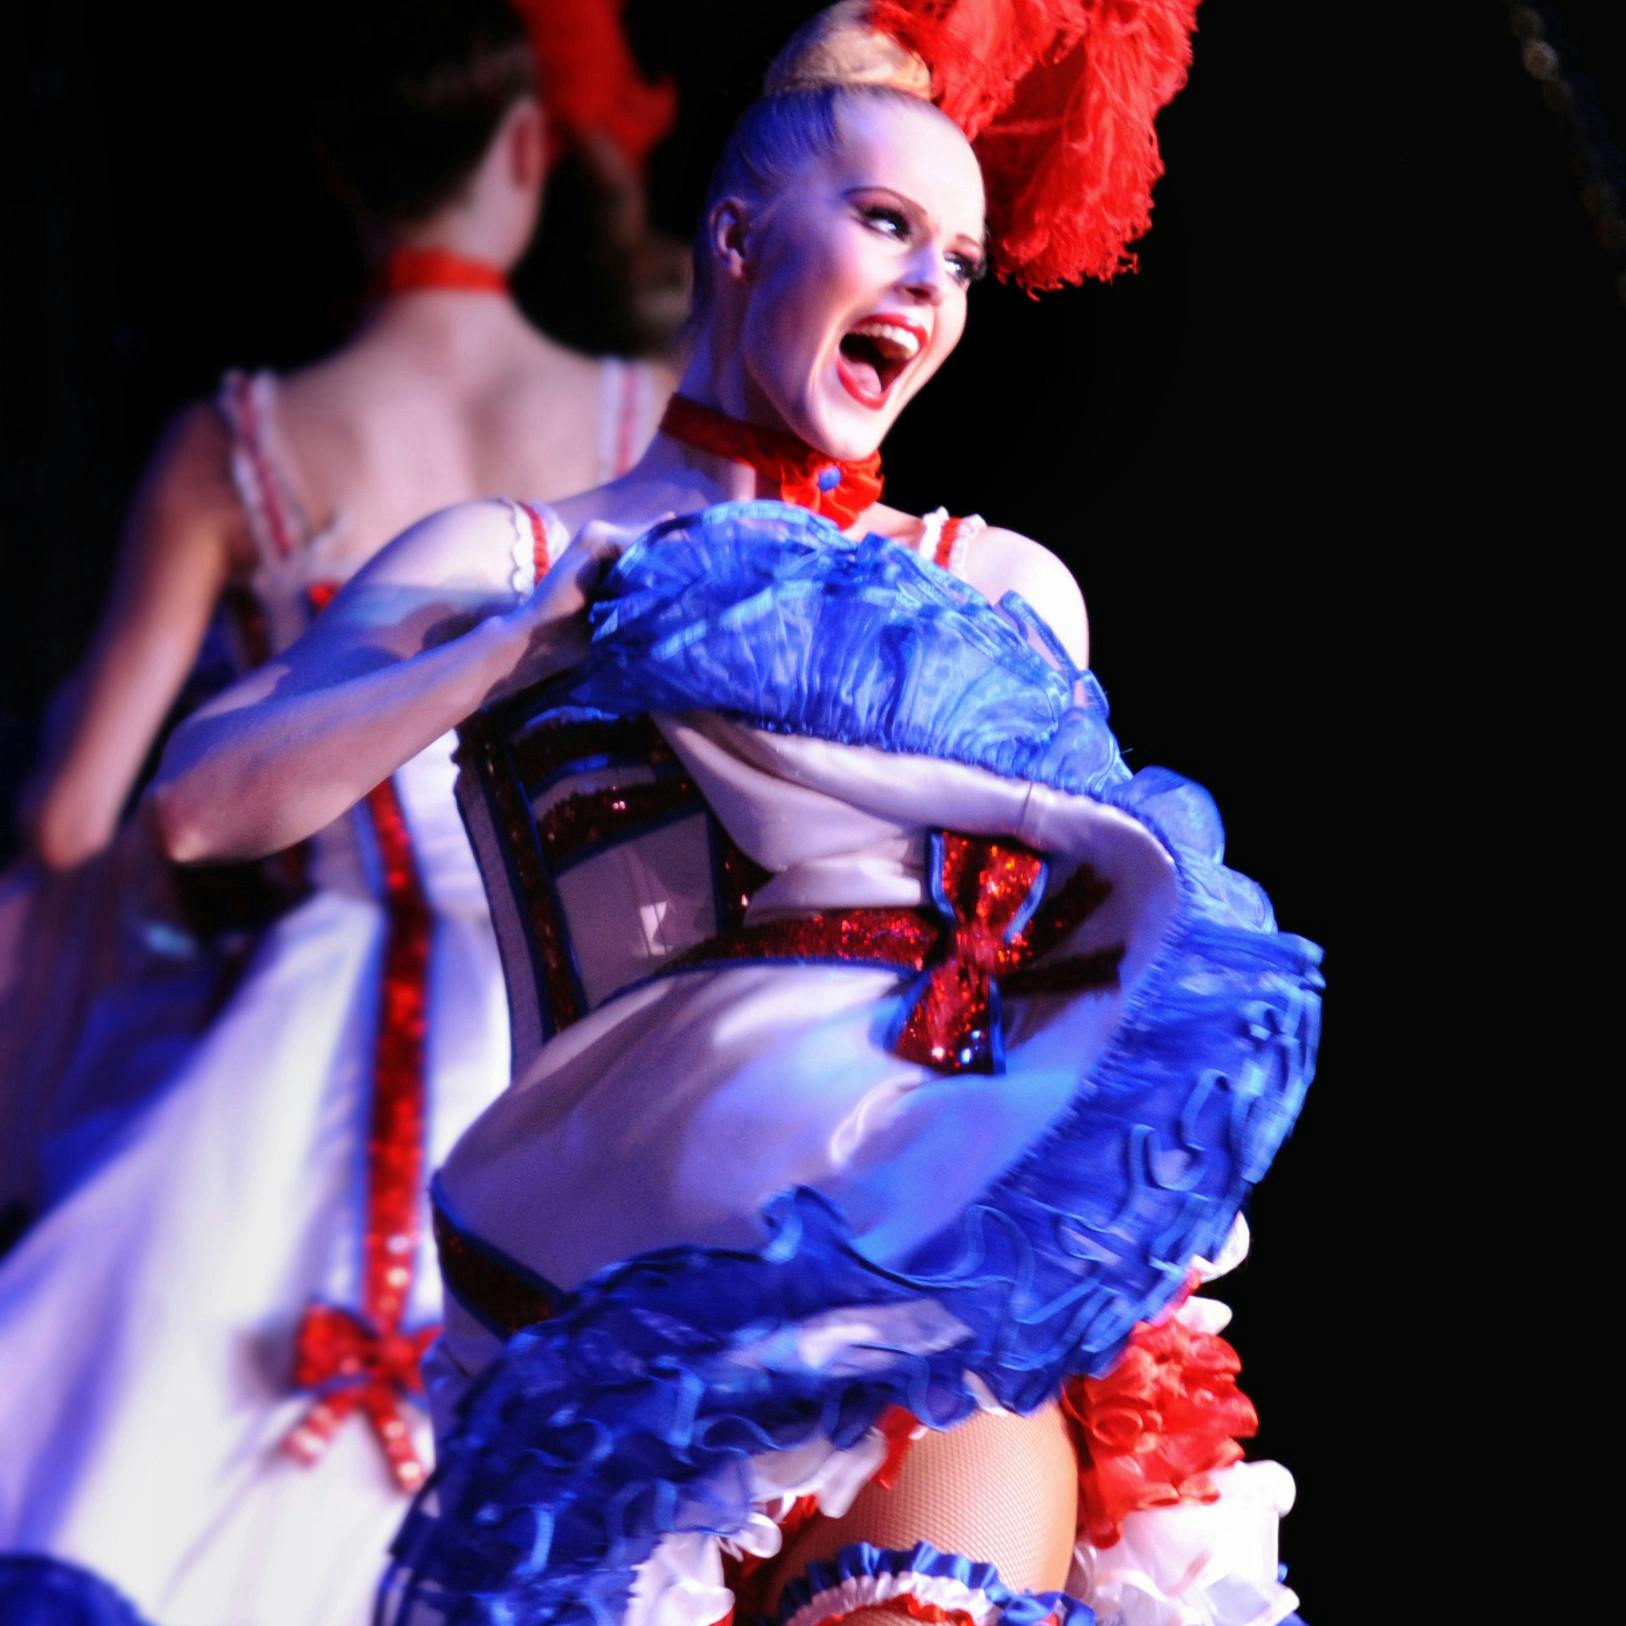 MOULIN ROUGE_french cancan2_(C)Sandie Bertrand_thumbnail example.jpg